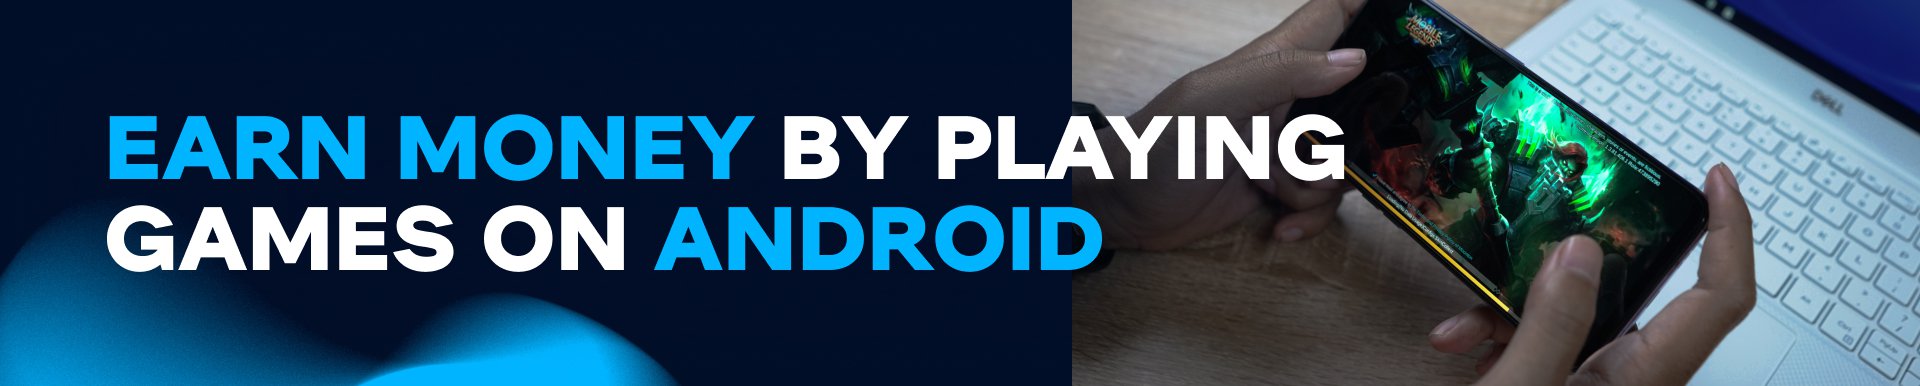 Earn Money by Playing Games on Android